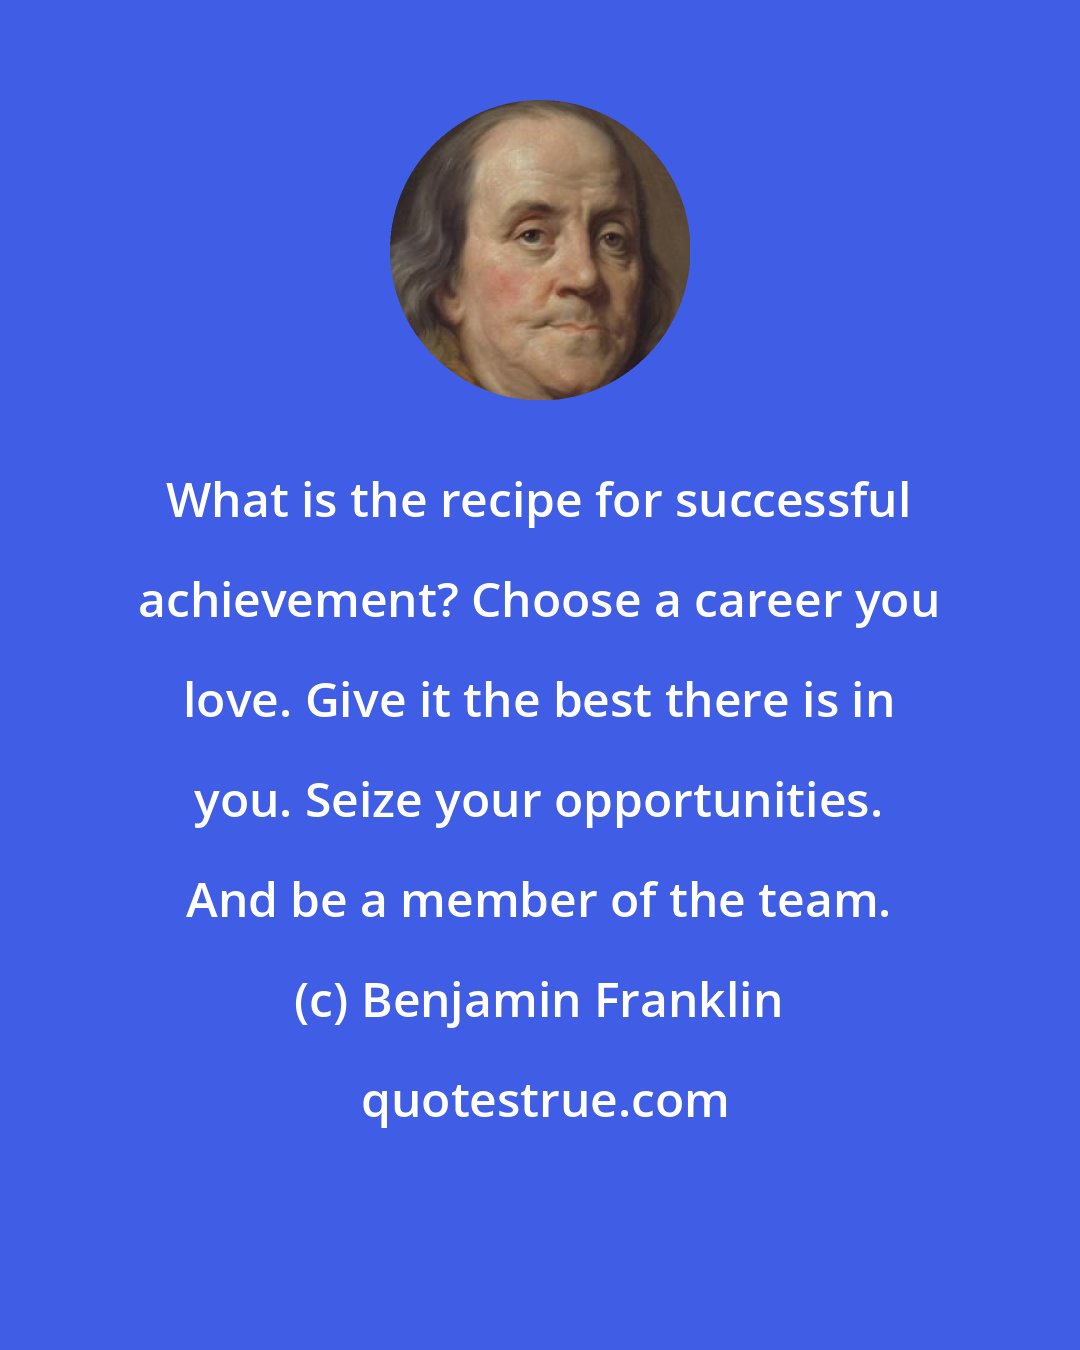 Benjamin Franklin: What is the recipe for successful achievement? Choose a career you love. Give it the best there is in you. Seize your opportunities. And be a member of the team.